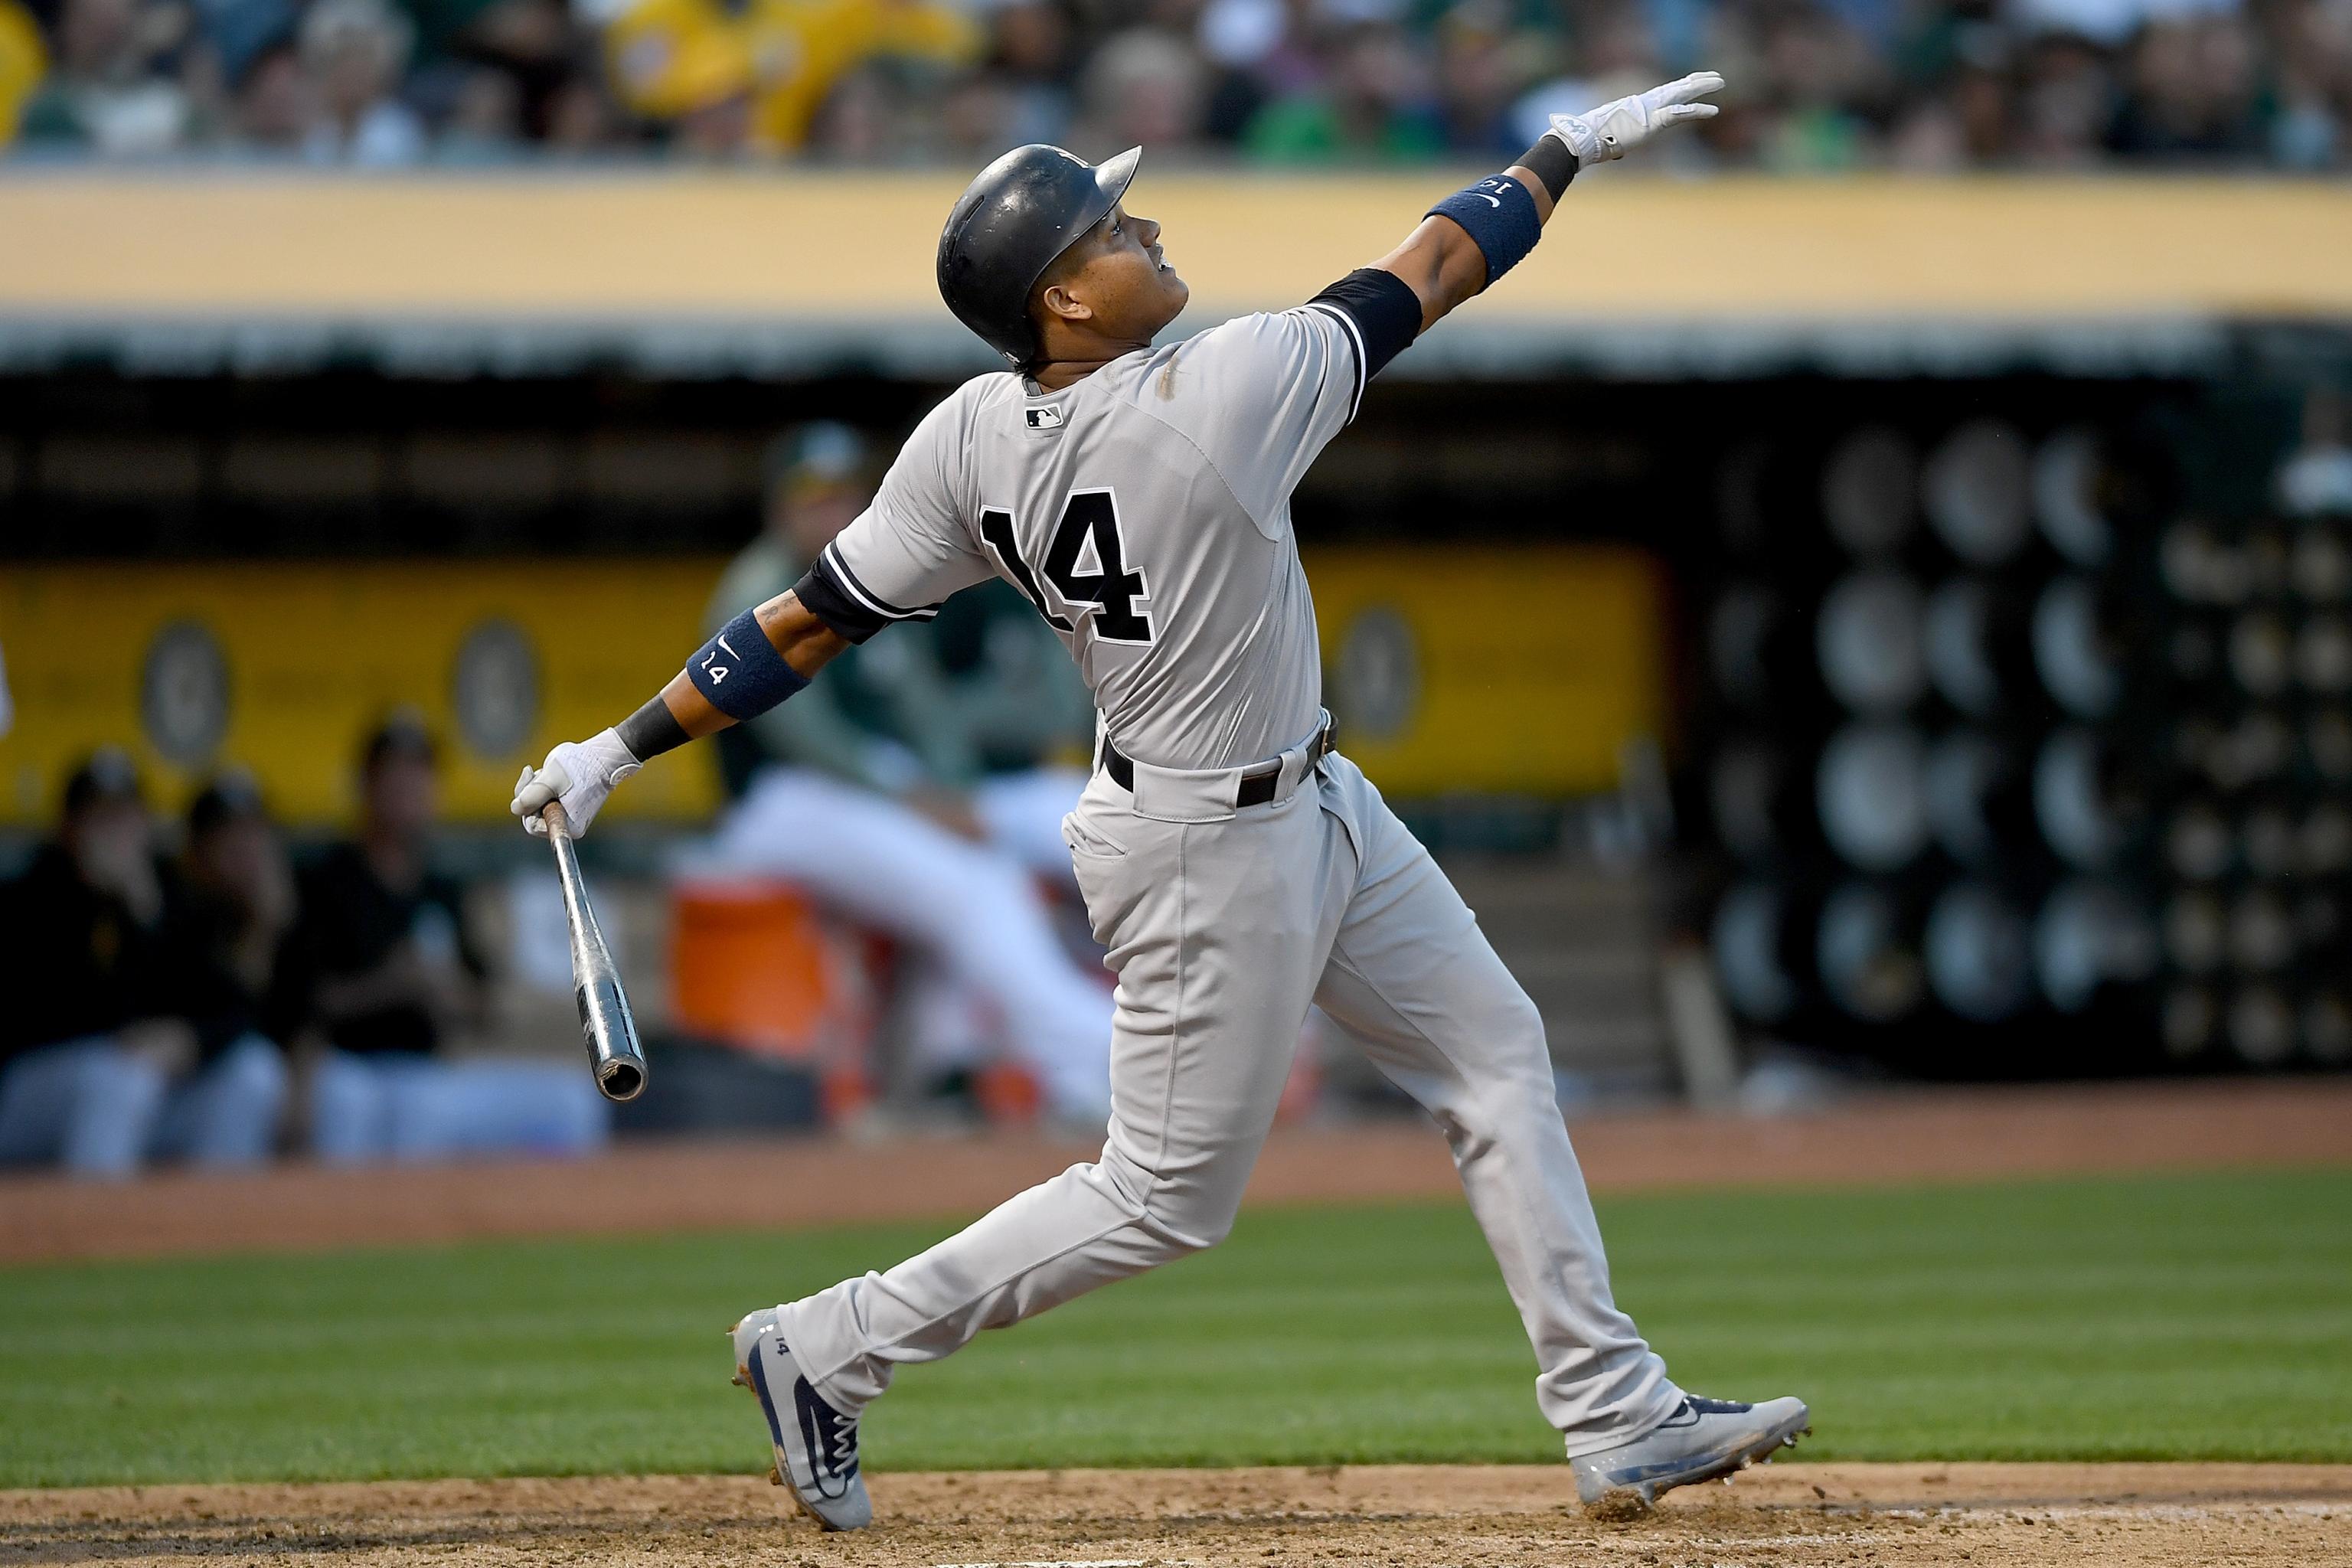 Former Cubs infielder Starlin Castro hits 10 years of MLB service time